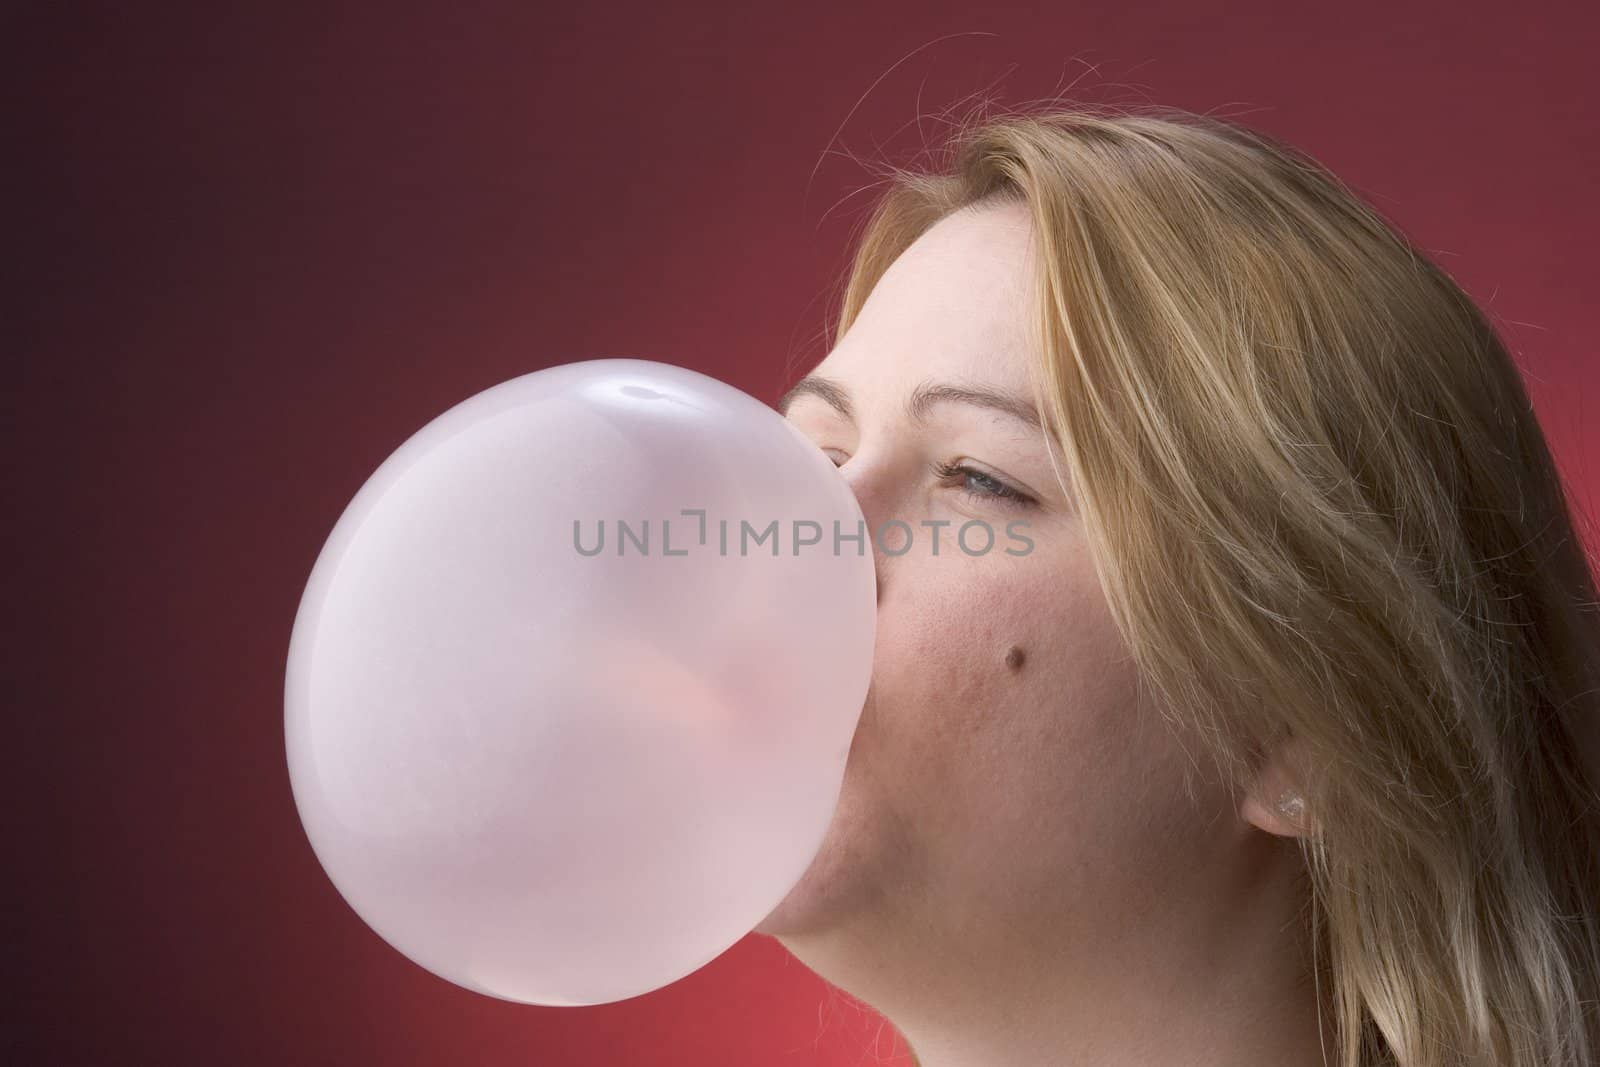 Profile of a women blowing a bubble